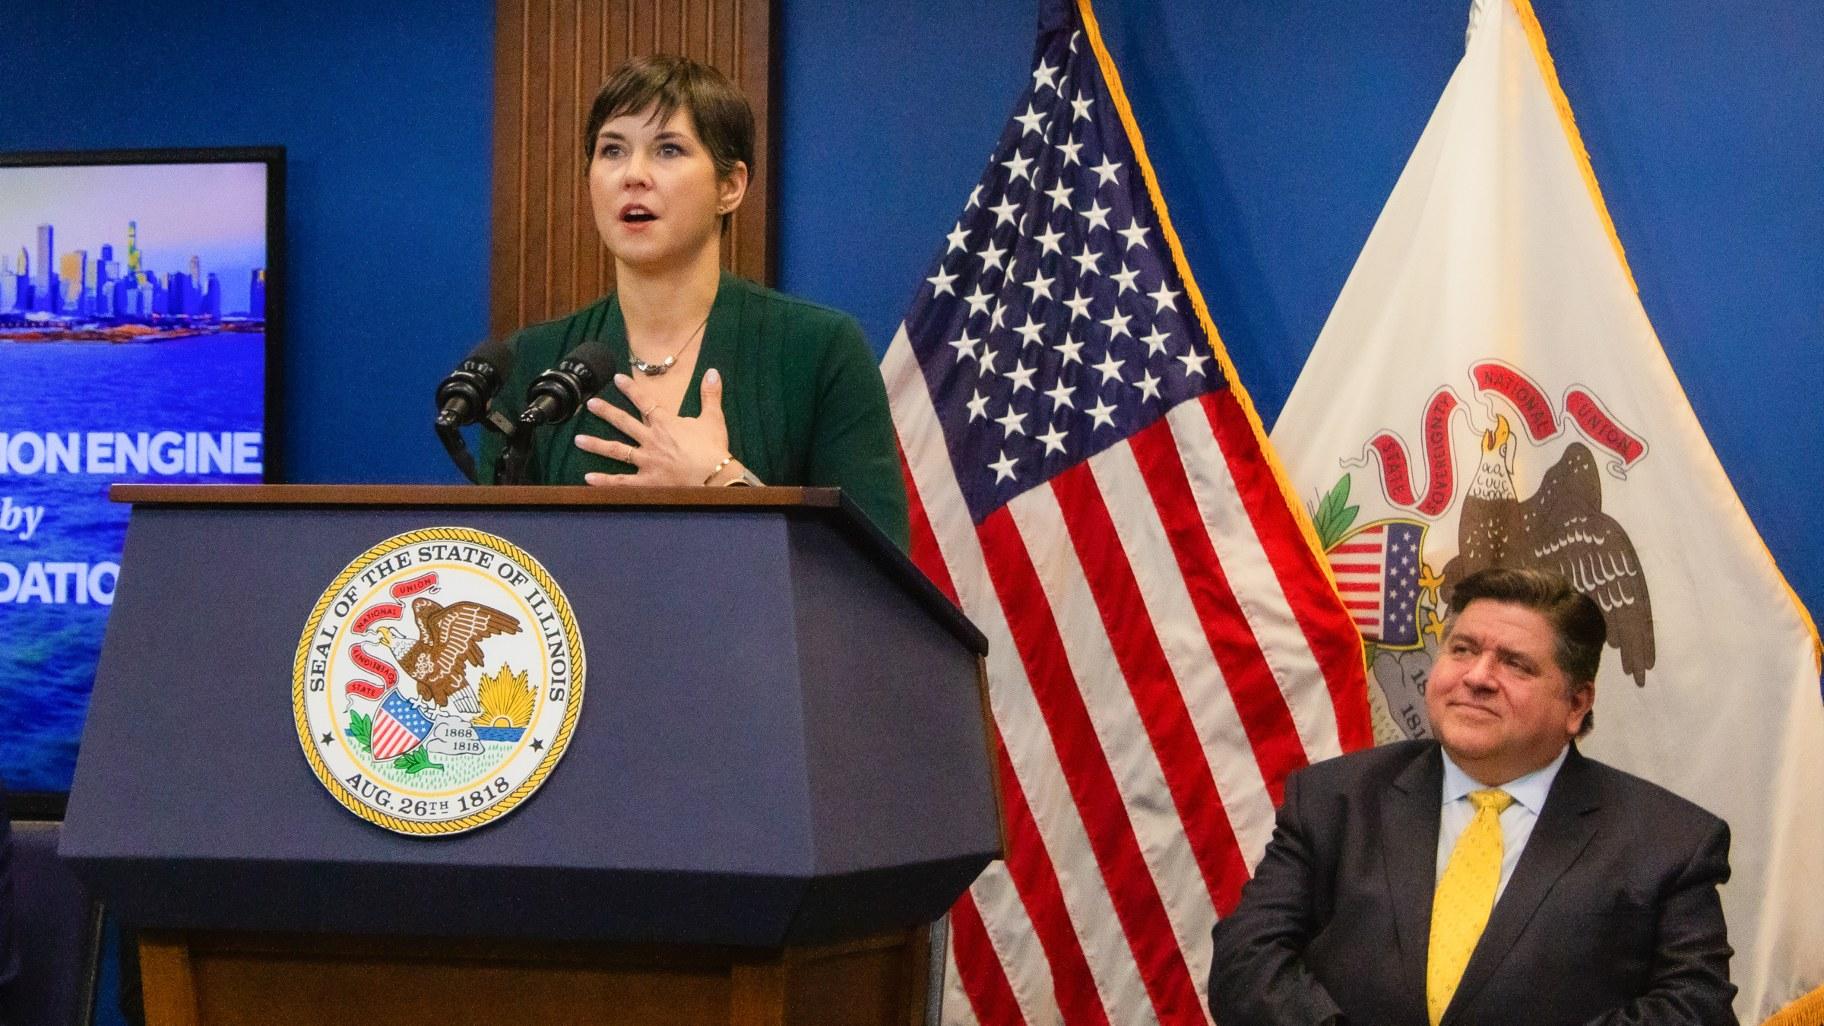 Alaina Harkness, the executive director of the water tech nonprofit Current, appears at a Chicago news conference on Jan. 30, 2024, with Gov. J.B. Pritzker. (Dilpreet Raju  / Capitol News Illinois)